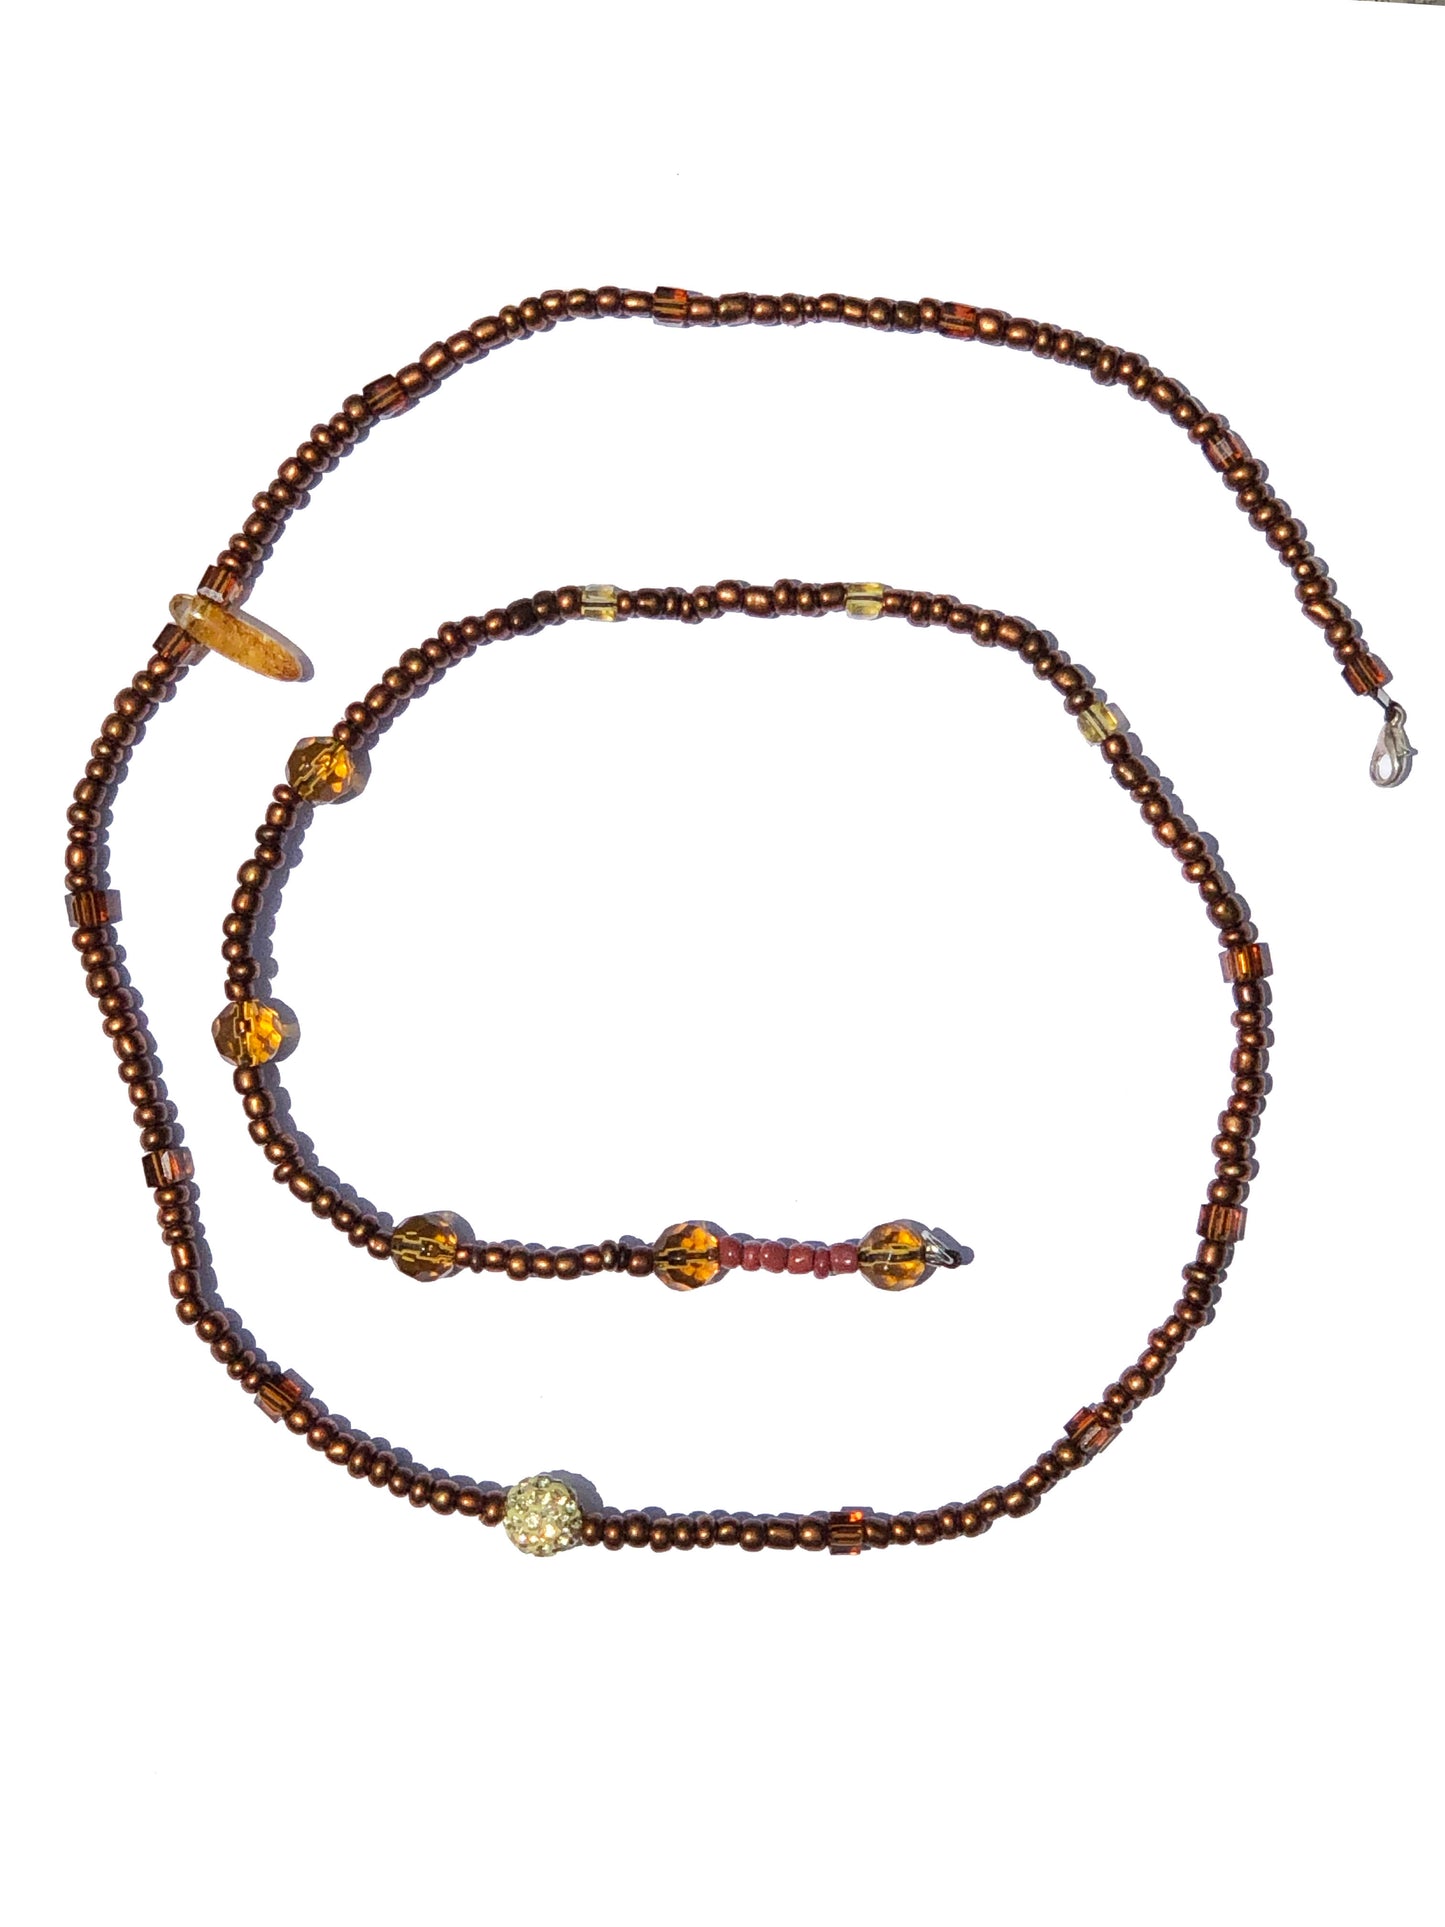 handcrafted belly chain beaded using a yellow tourmaline stone, yellow large glass beads, a crystal charm, and red and brown beads.